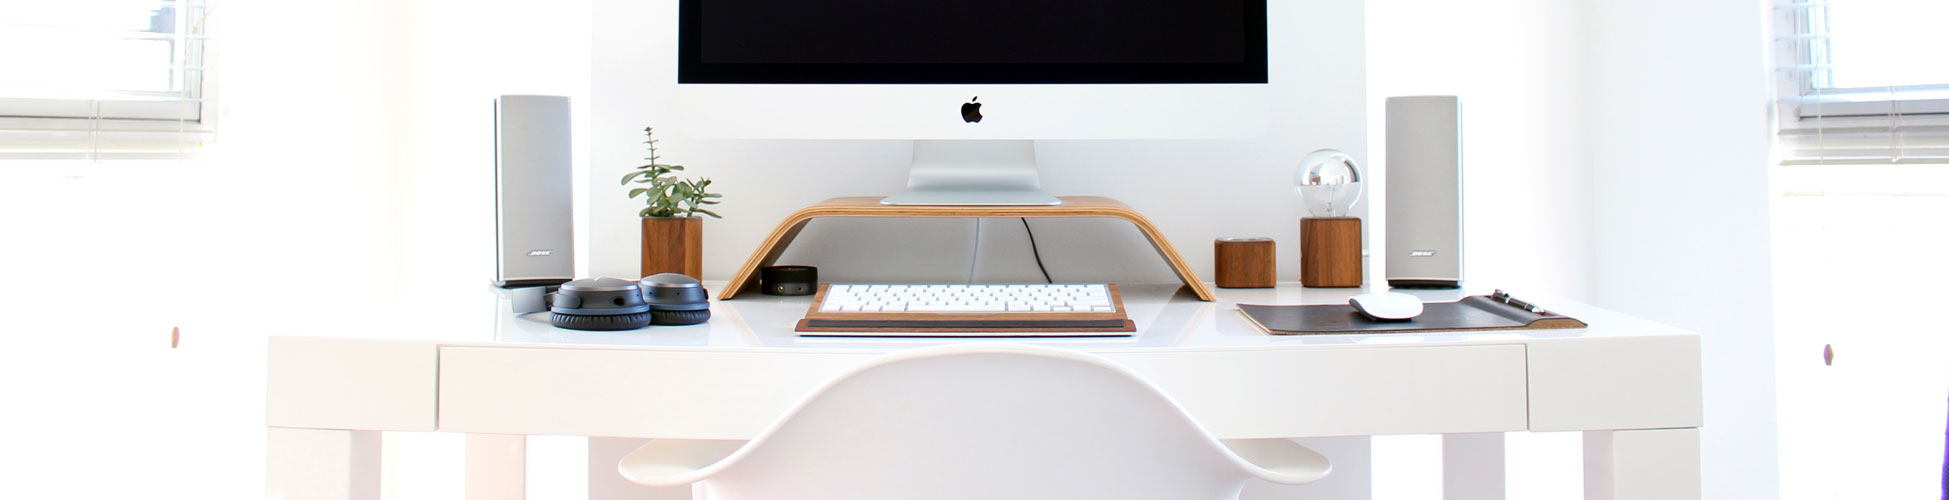 Accessories for your Home Office Desk